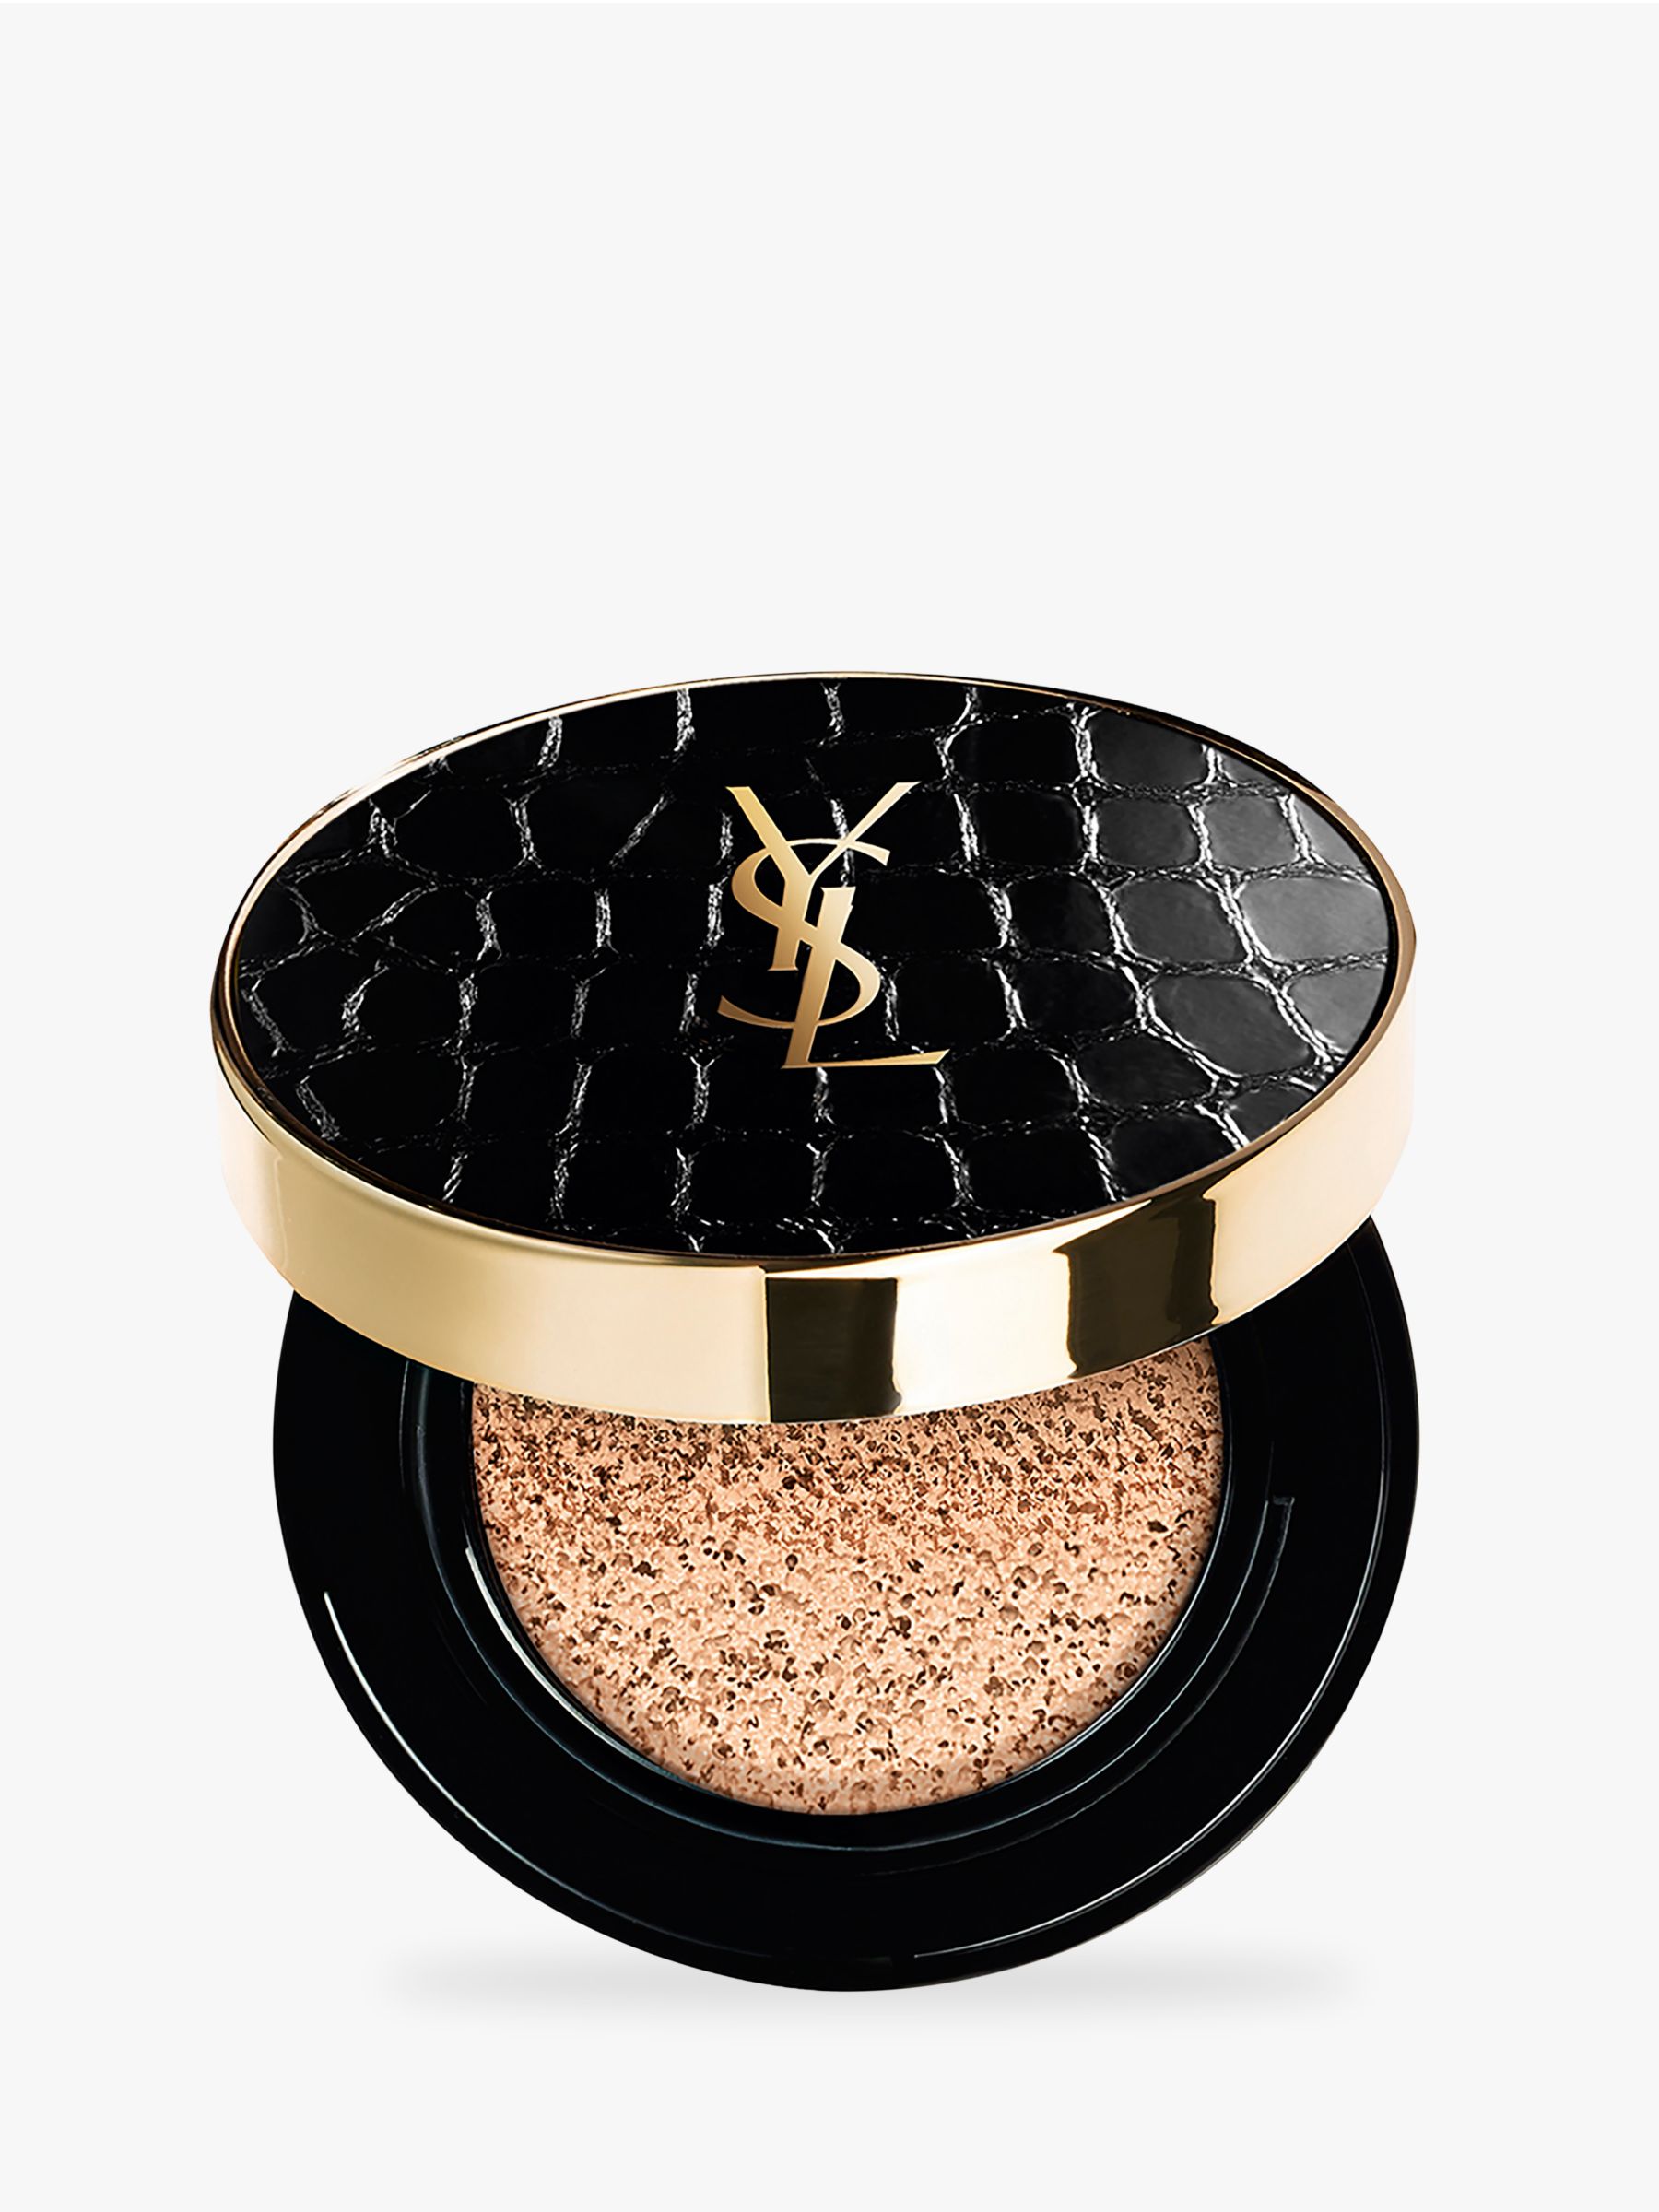 Yves Saint Laurent Fusion Ink Cushion Foundation Couture Edition